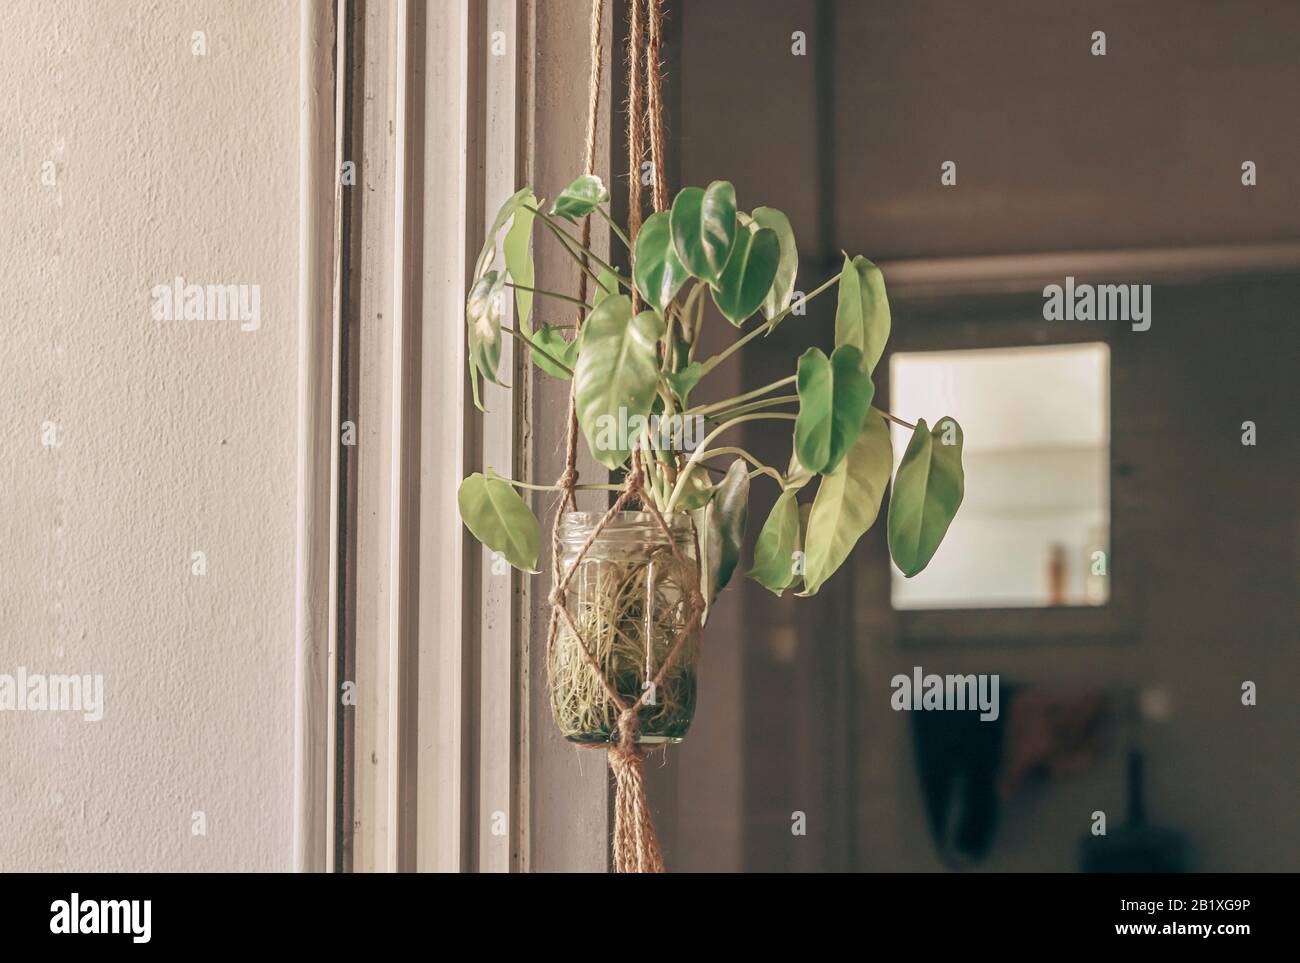 Potted houseplants in the balcony to show the concept gardening as a distraction during home quarantine and self isolation due to the covid-19 pandemi Stock Photo